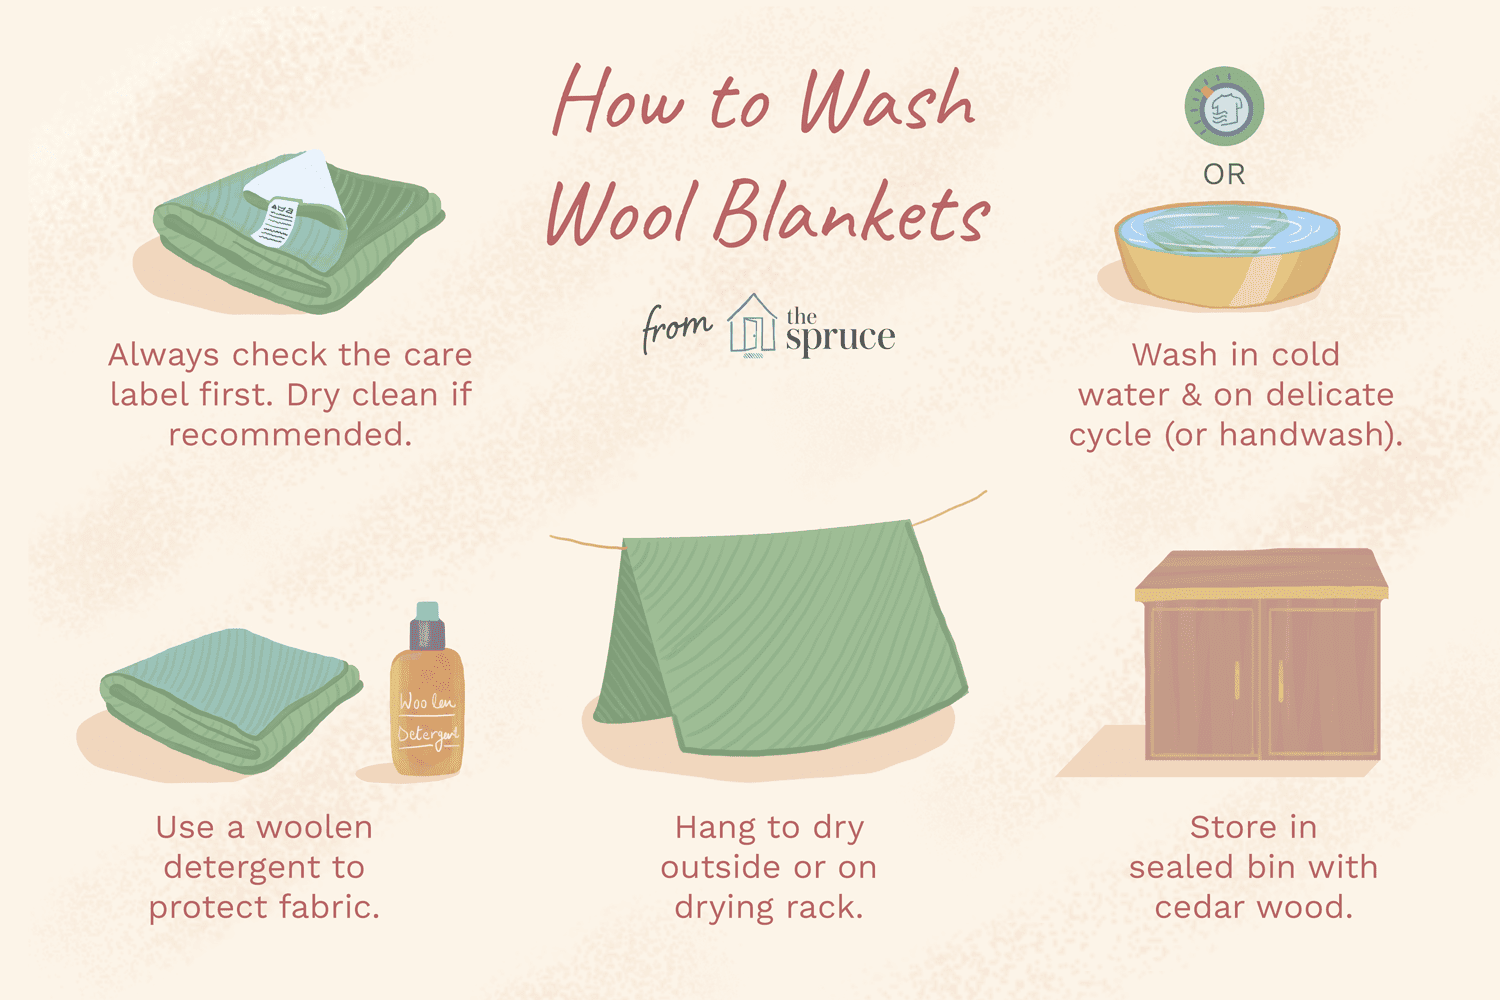 Cleaning and washing of blankets